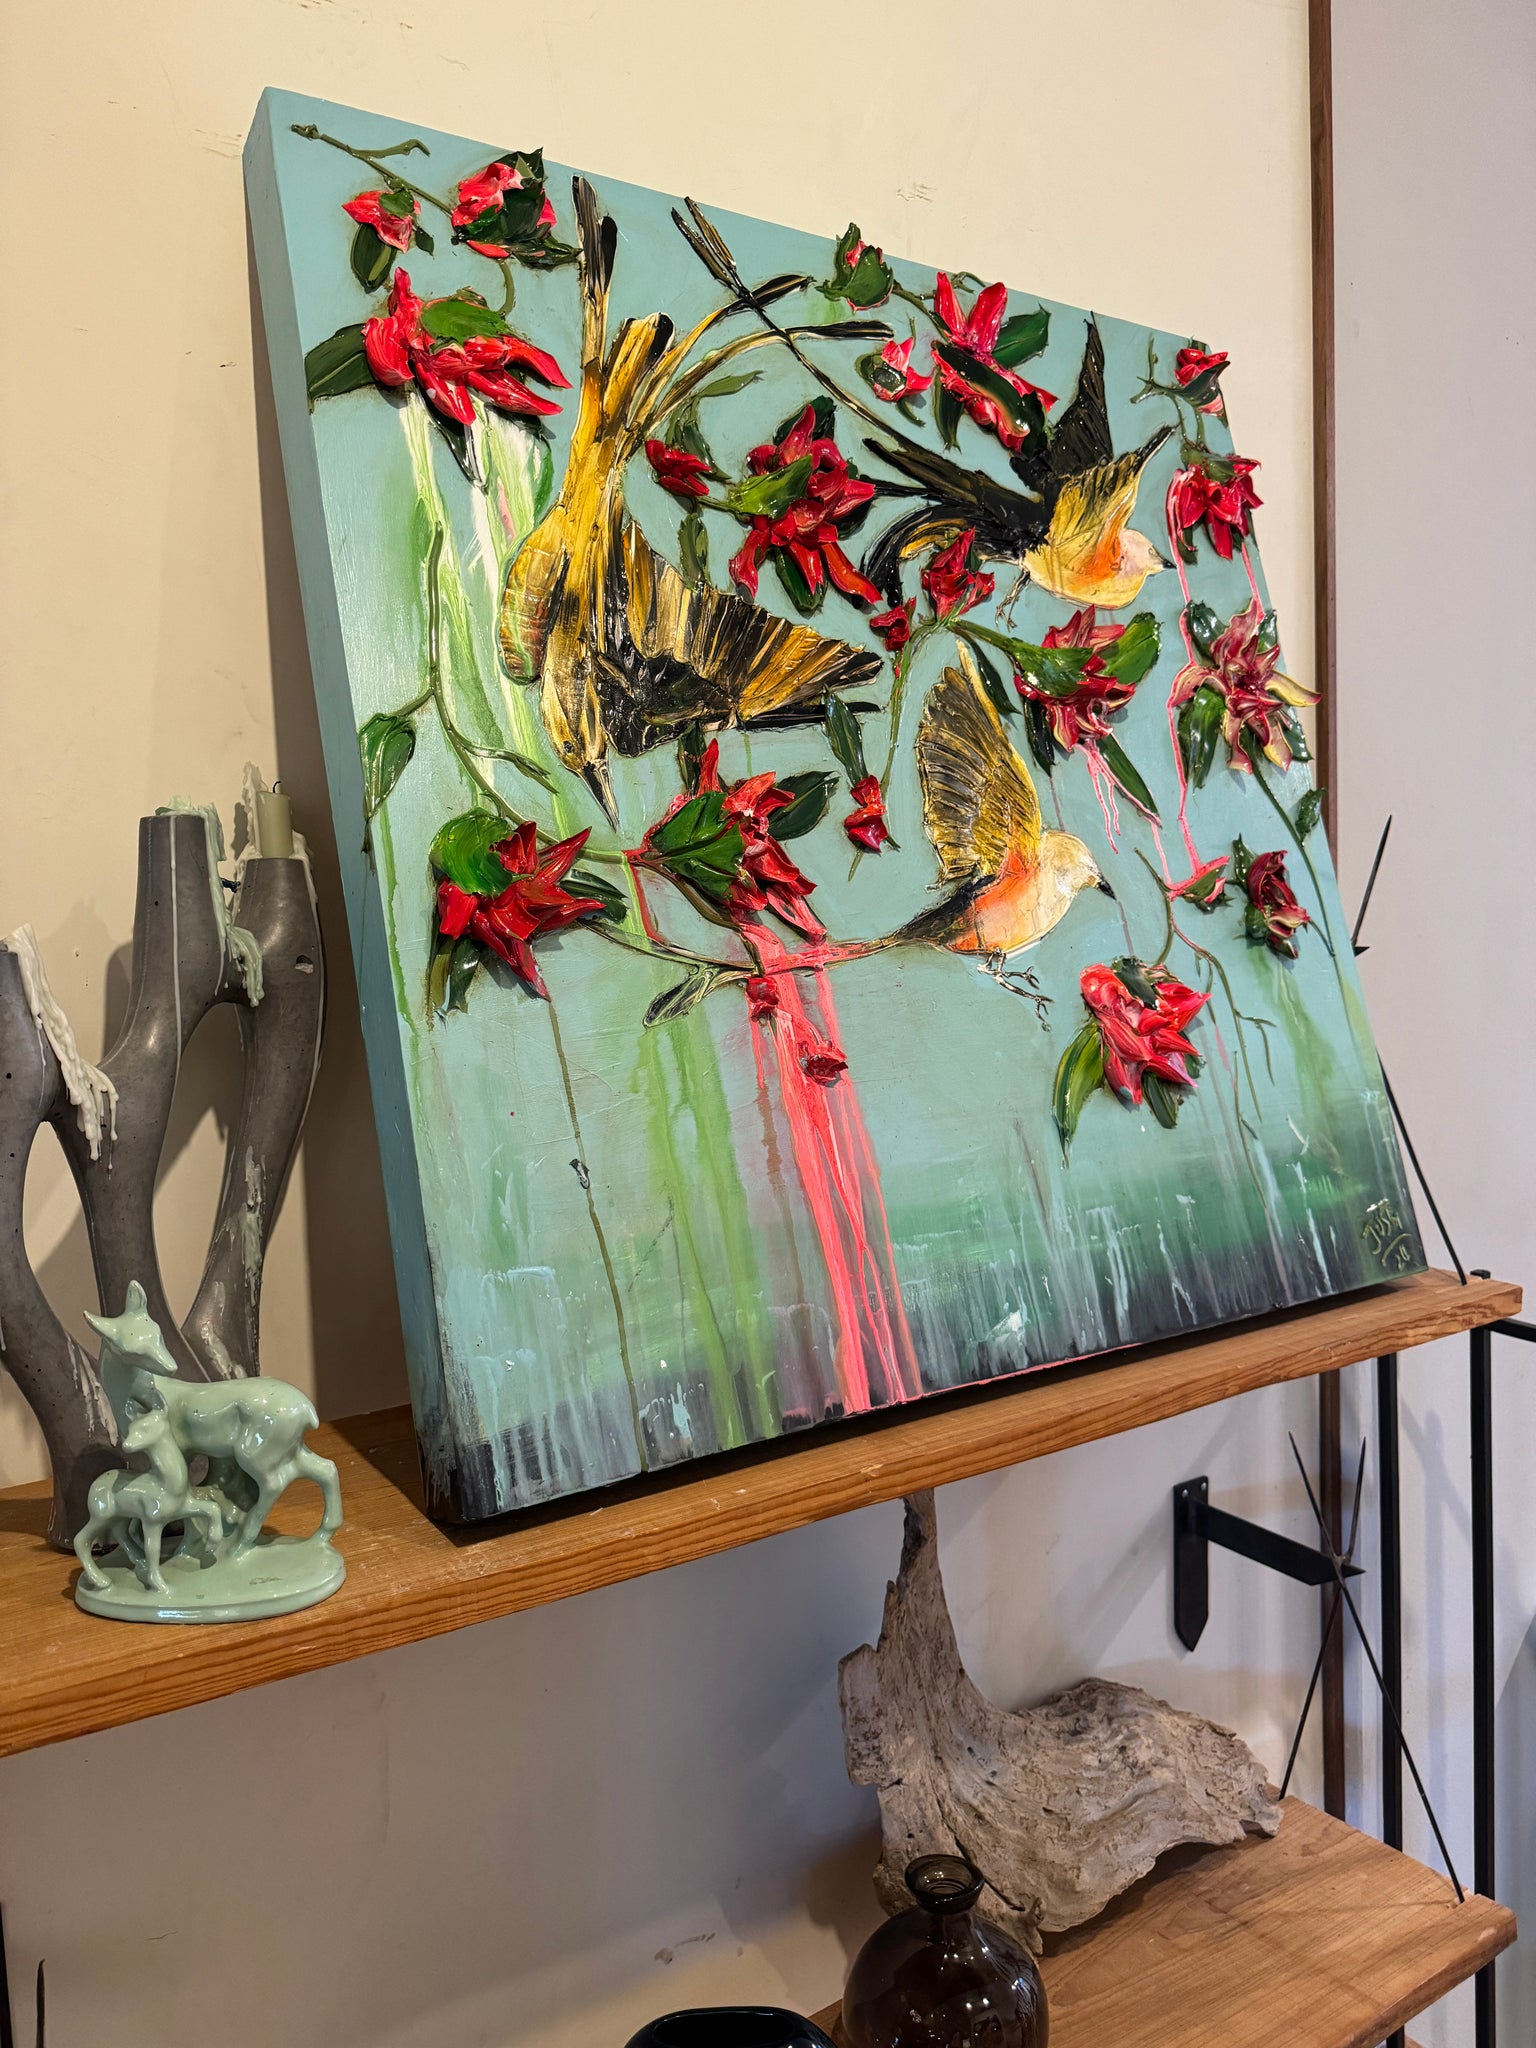 Flycatchers and Calycanthus, 36x36